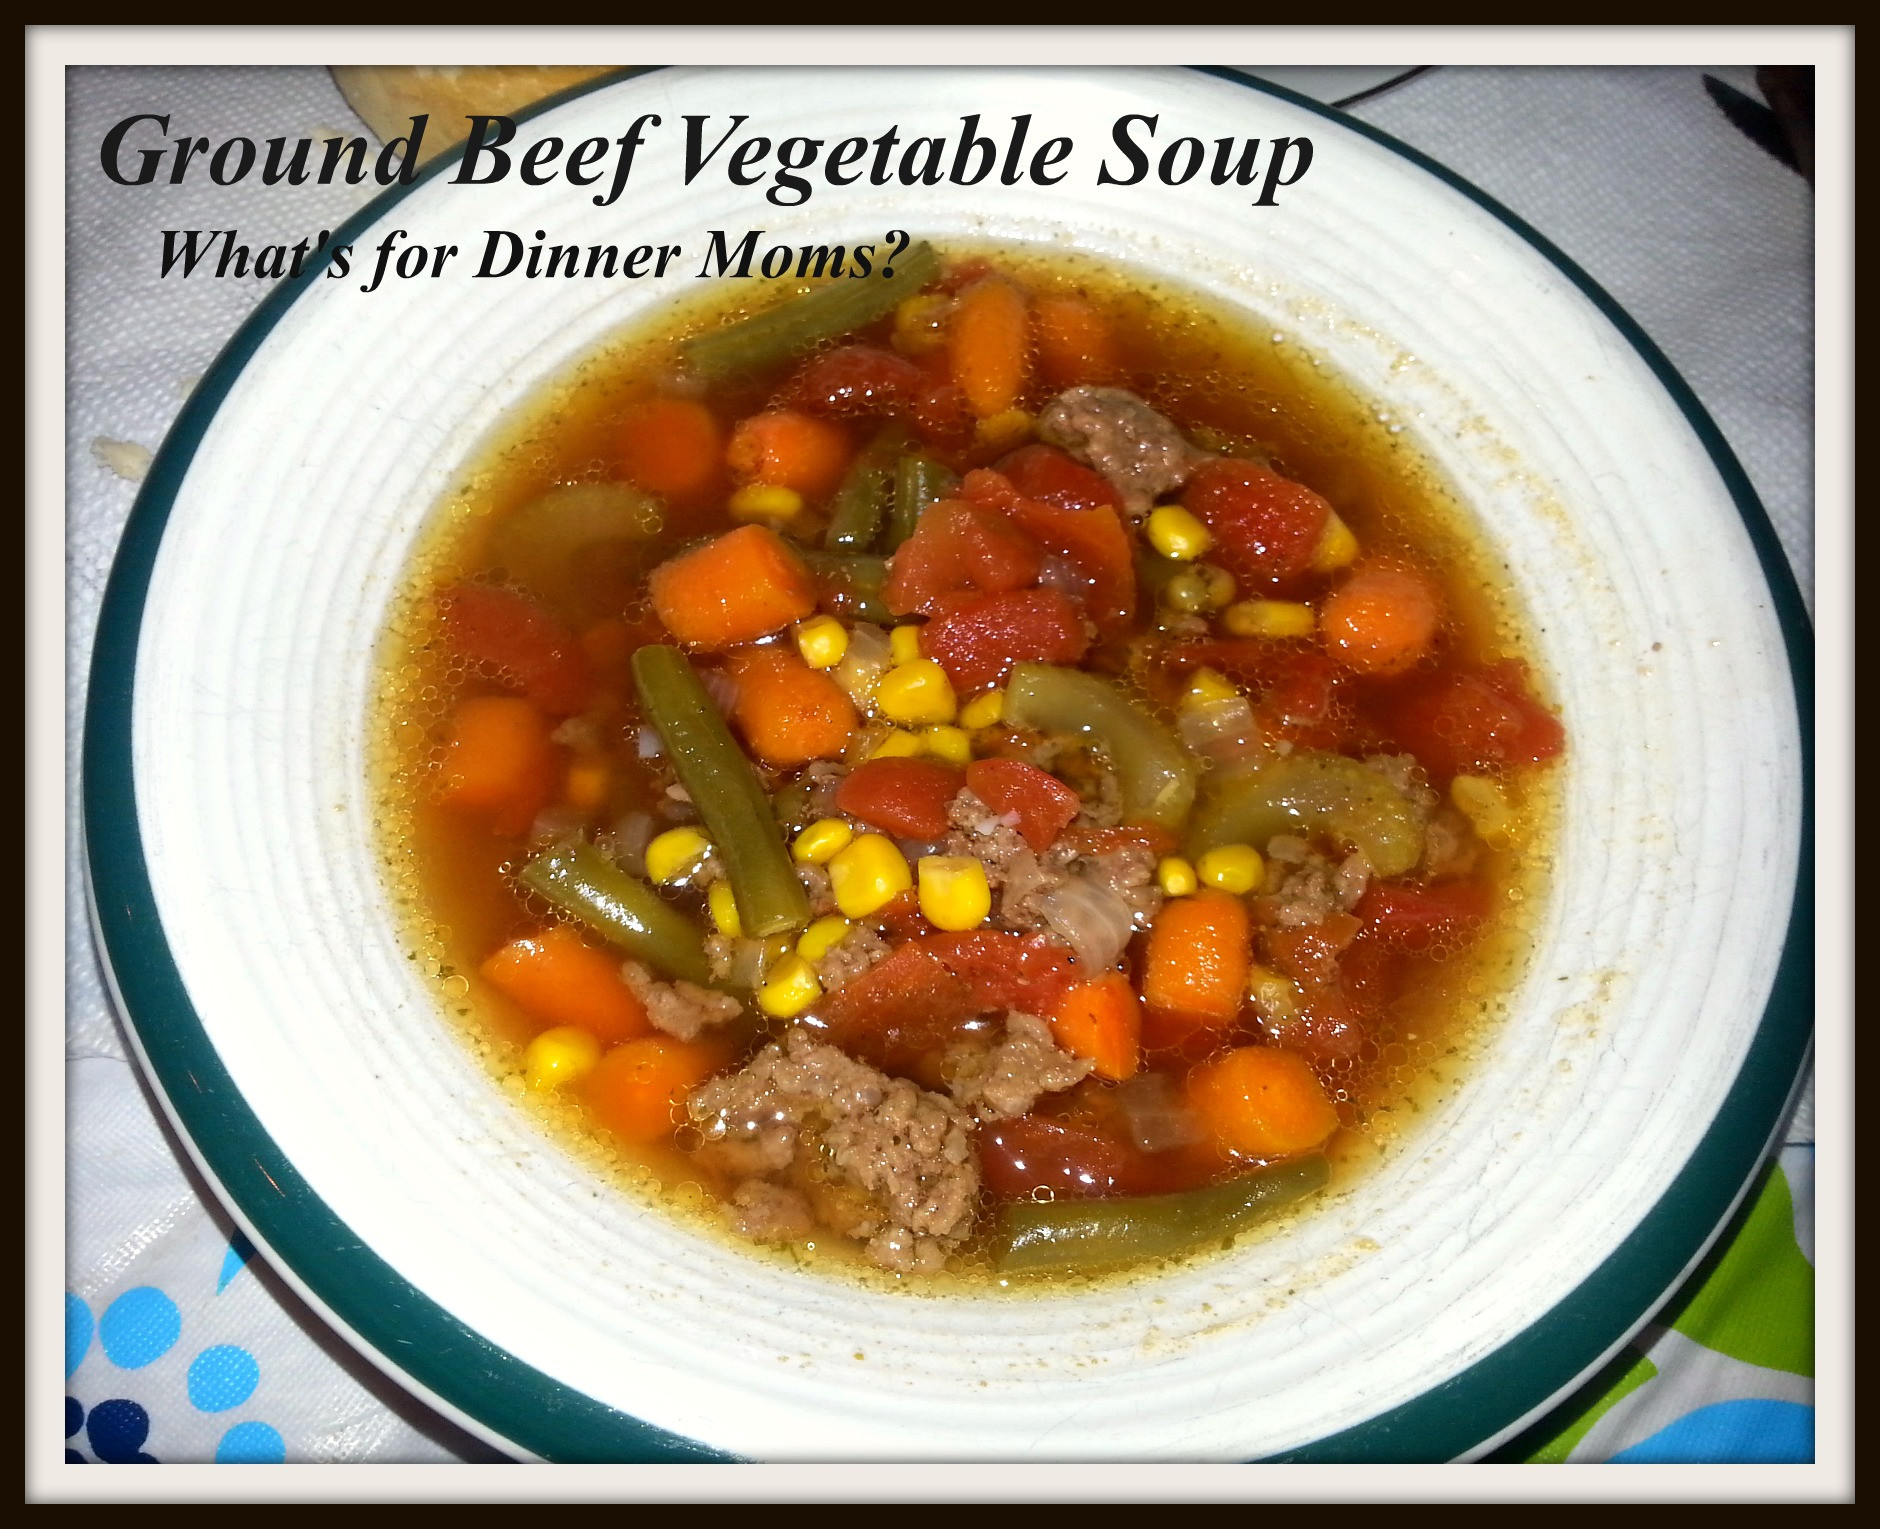 Vegetable Beef Soup With Ground Beef
 Ve able Soup with Ground Beef – What s for Dinner Moms